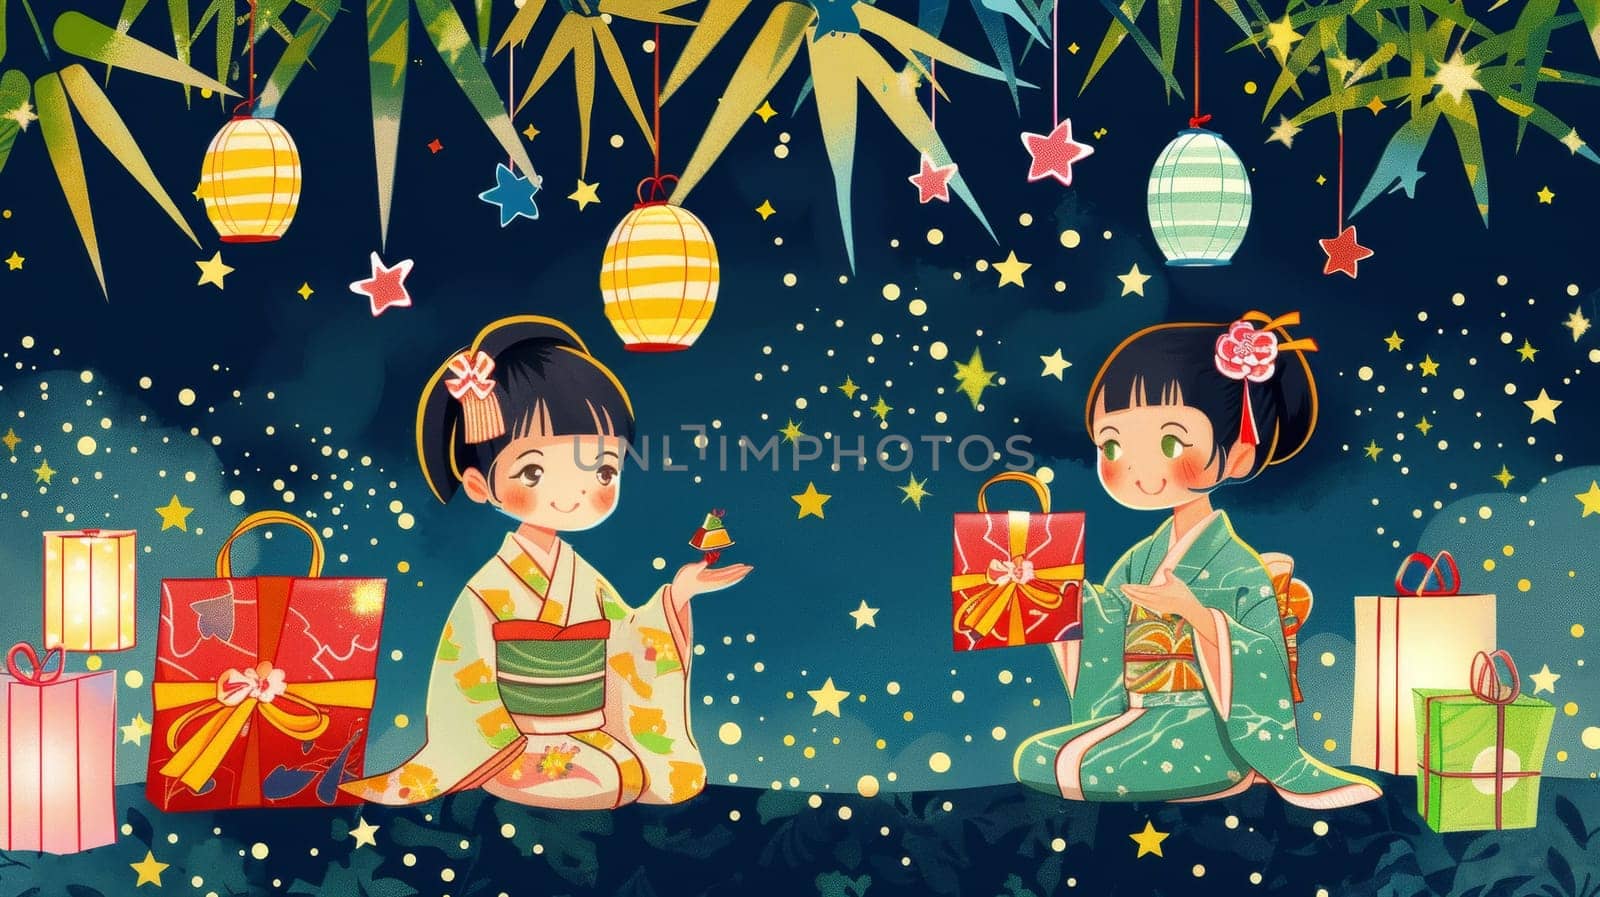 Illustration of two children in kimonos, smiling joyfully with gifts, under a starry sky adorned with Tanabata decorations